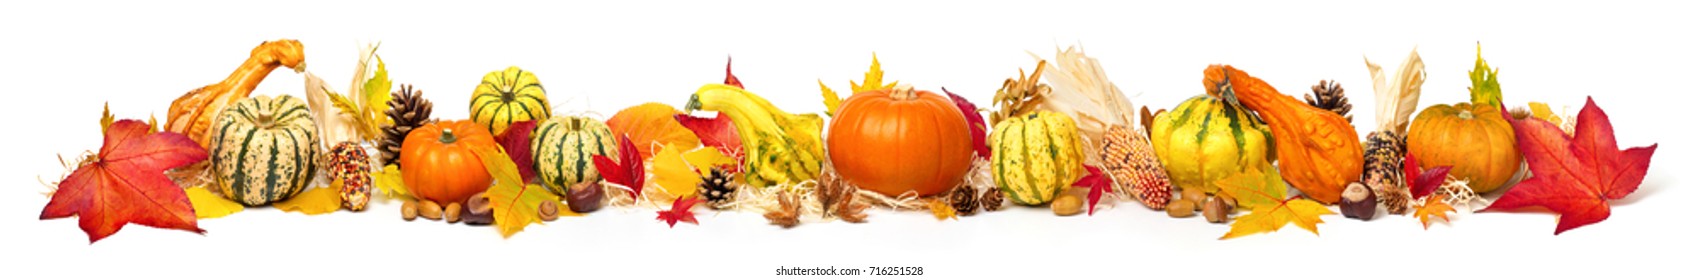 Colorful autumn decoration with leaves, pumpkins and more, isolated and extra wide format as banner or border